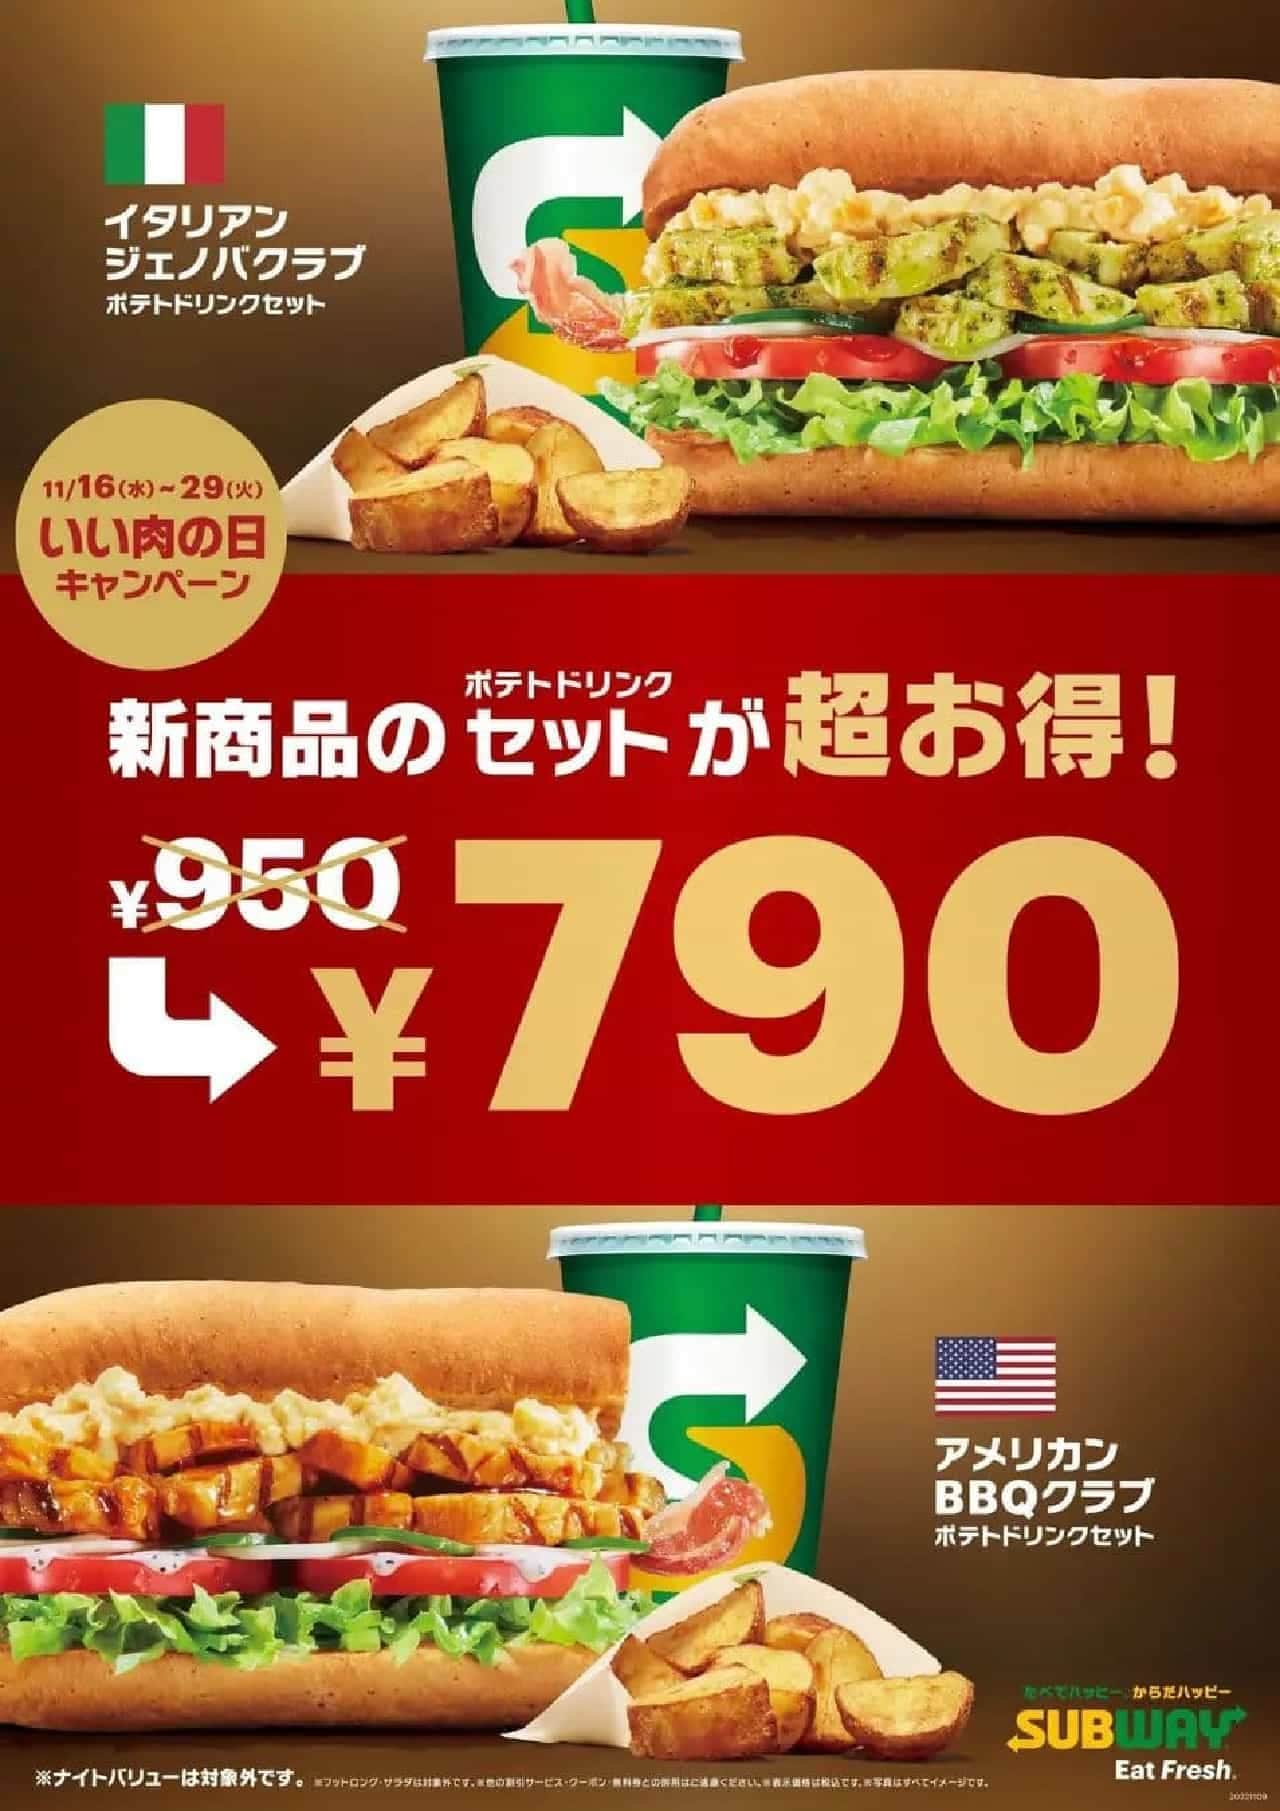 Subway "Good Meat Day" Campaign